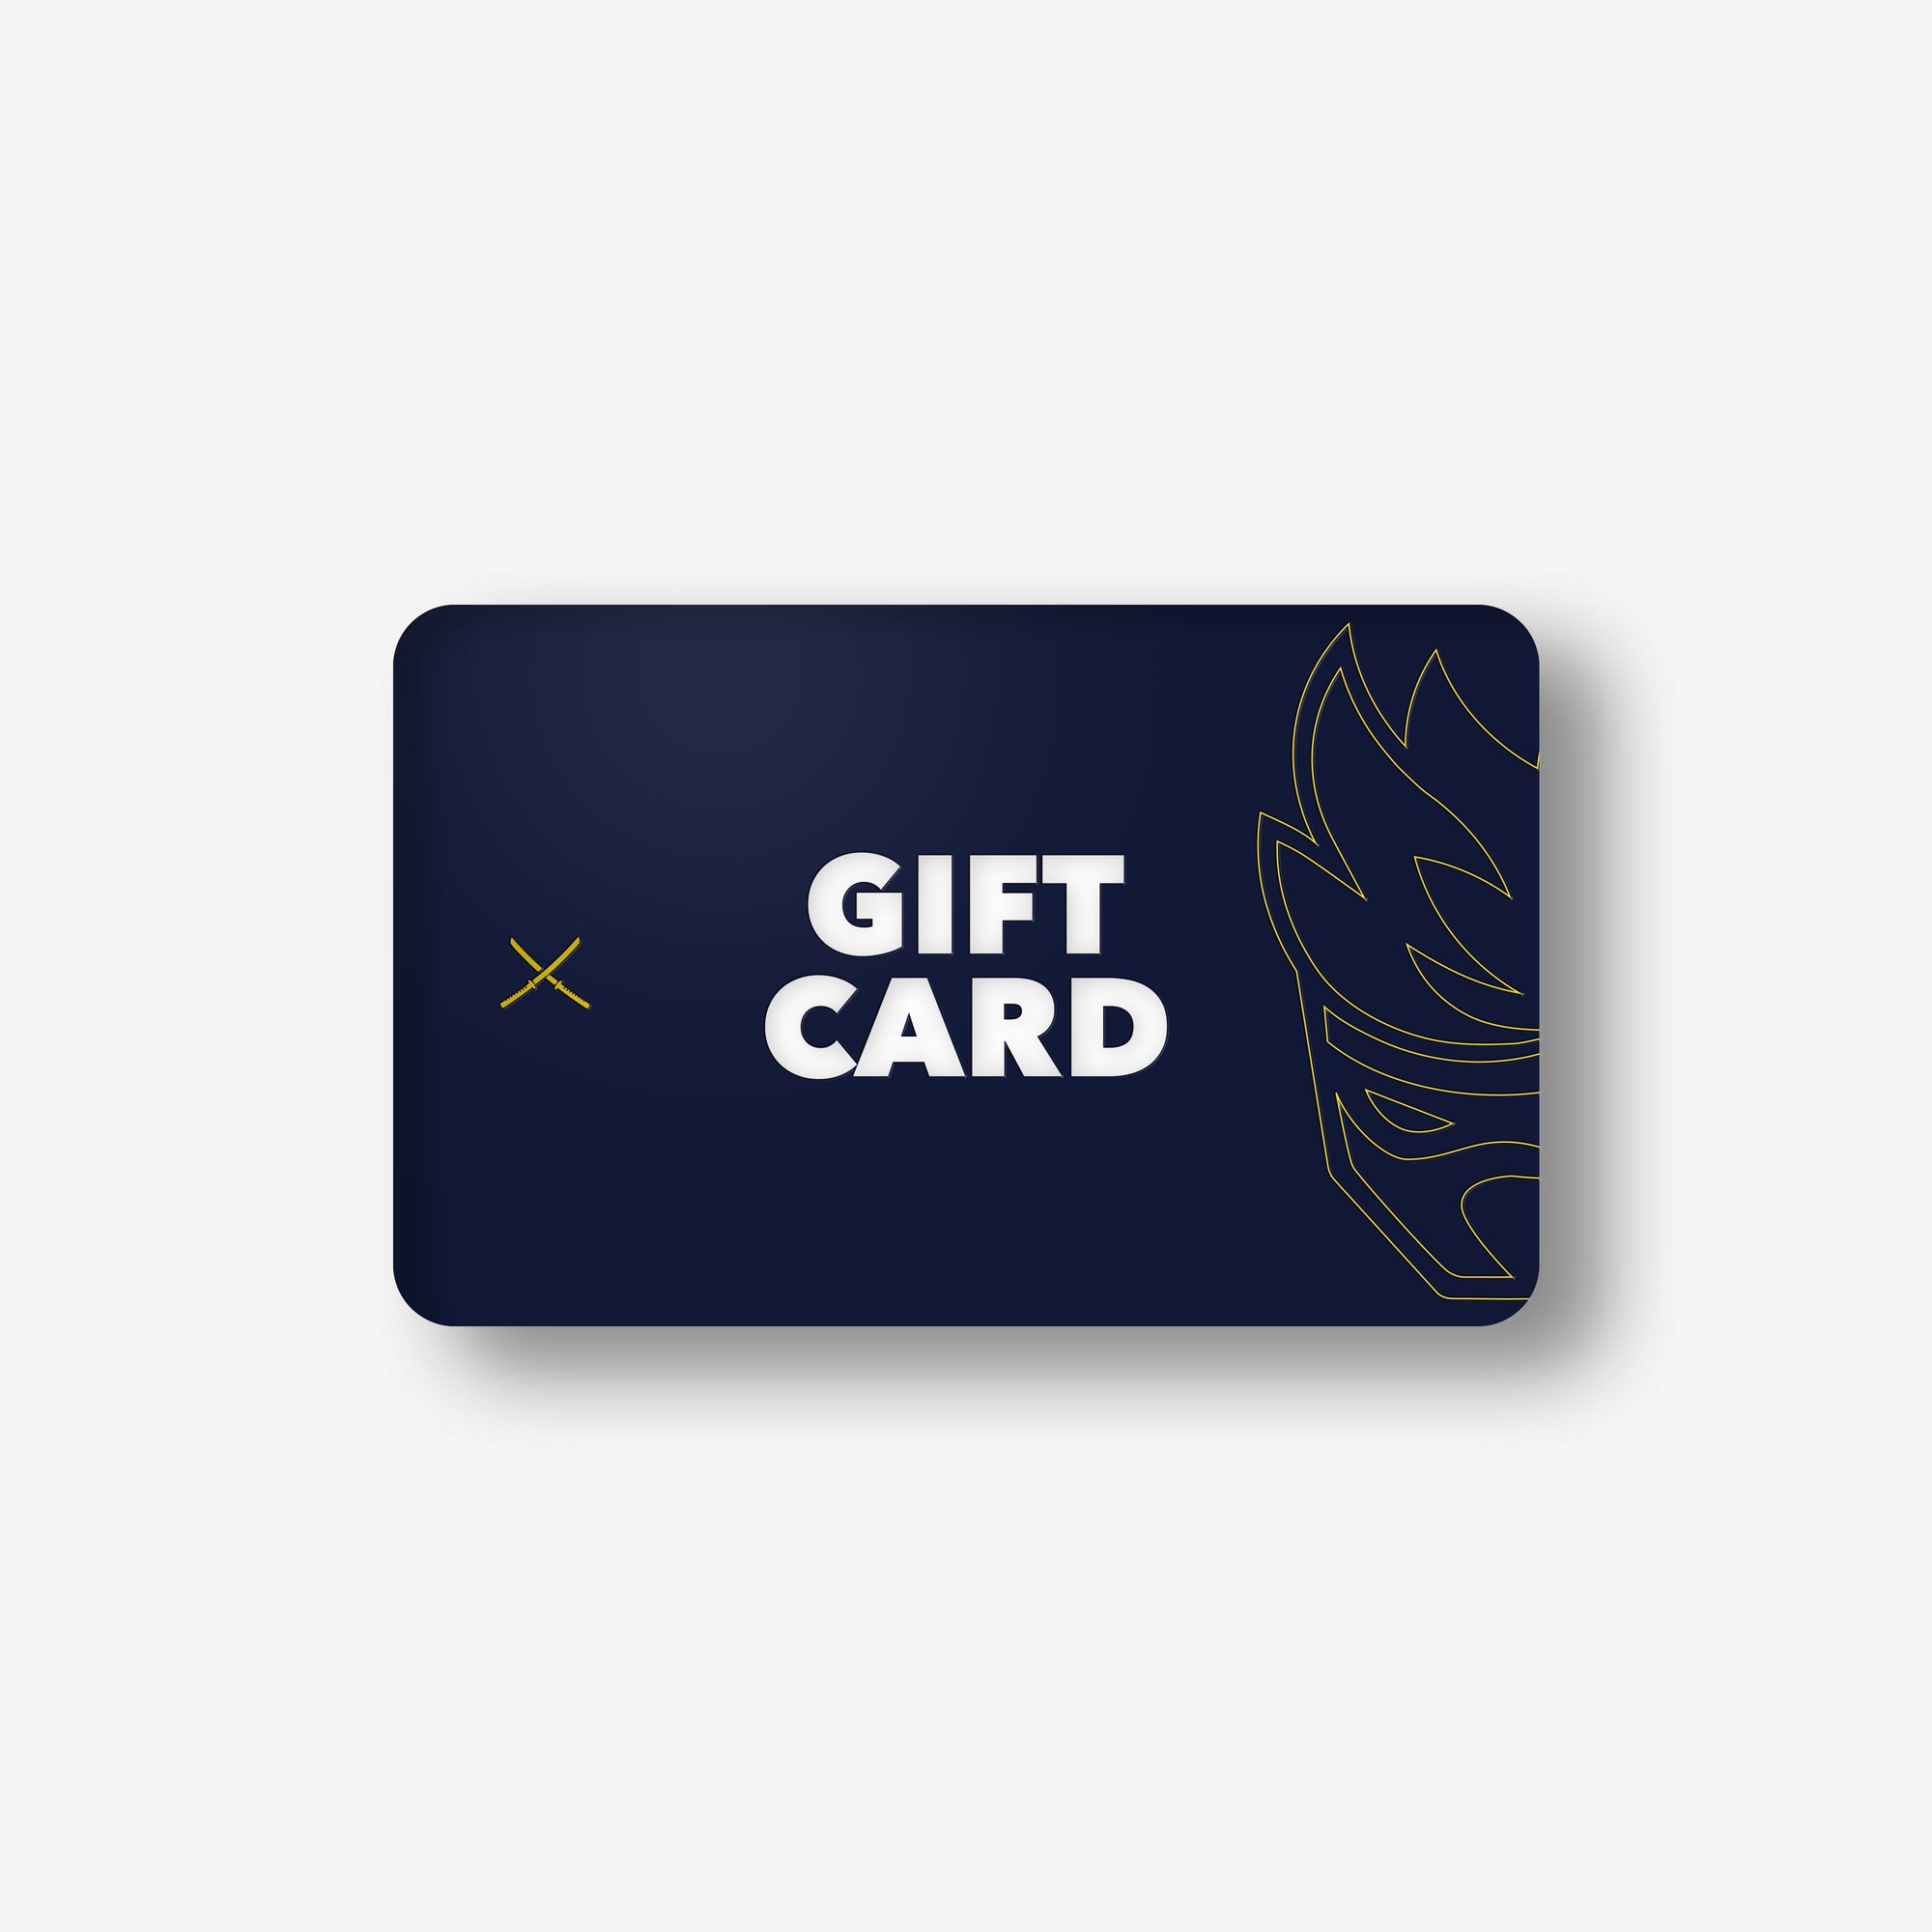 Product Image for Gift Card